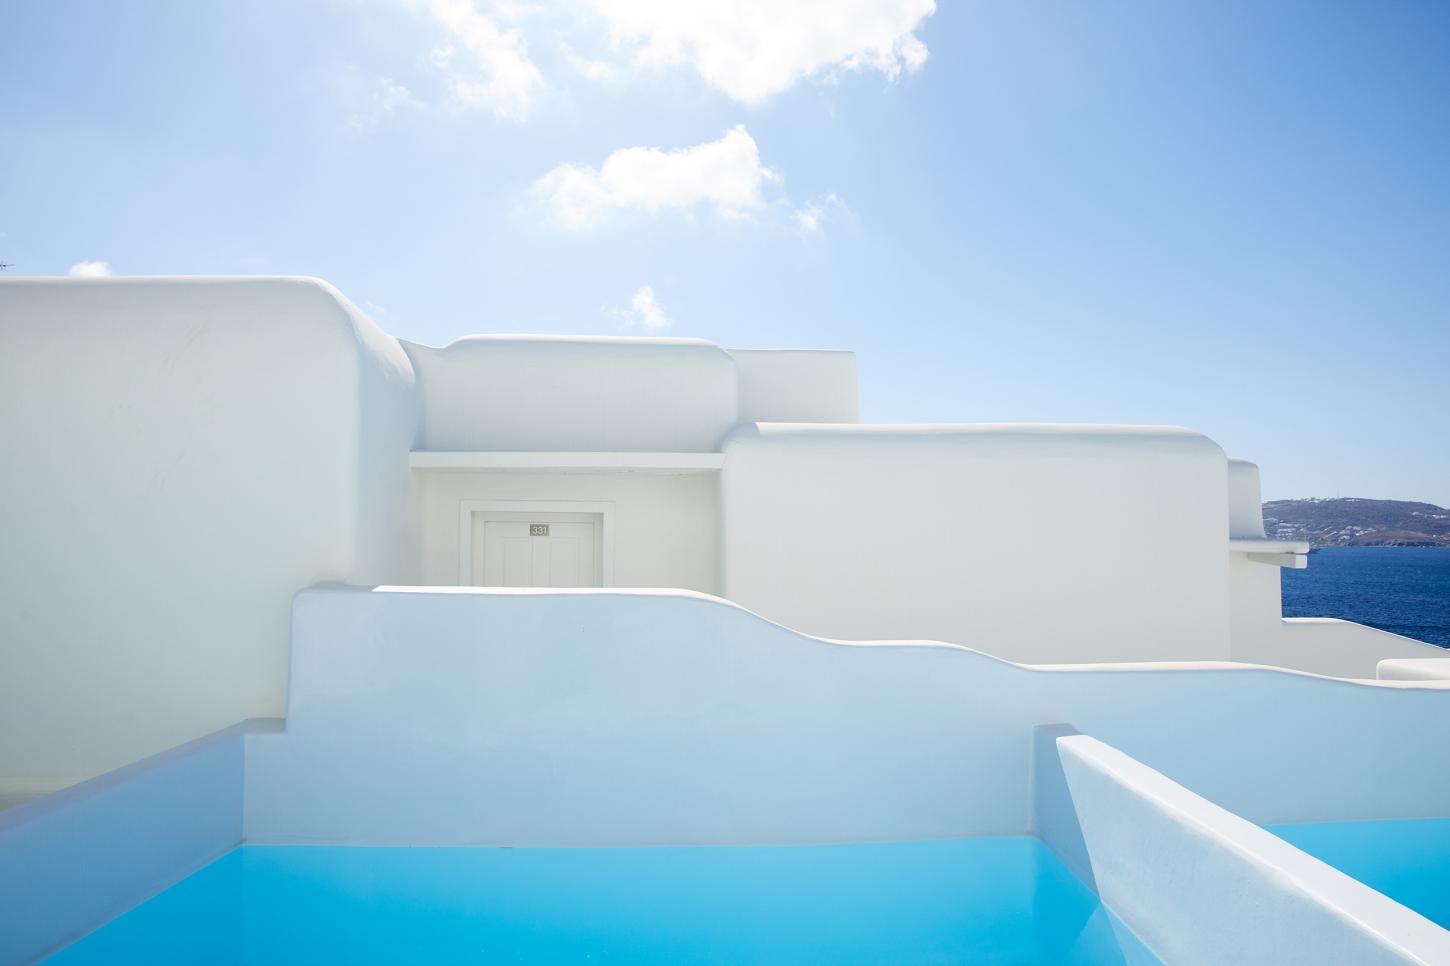 cycladic architecture with pool at Cavo Tagoo Mykonos